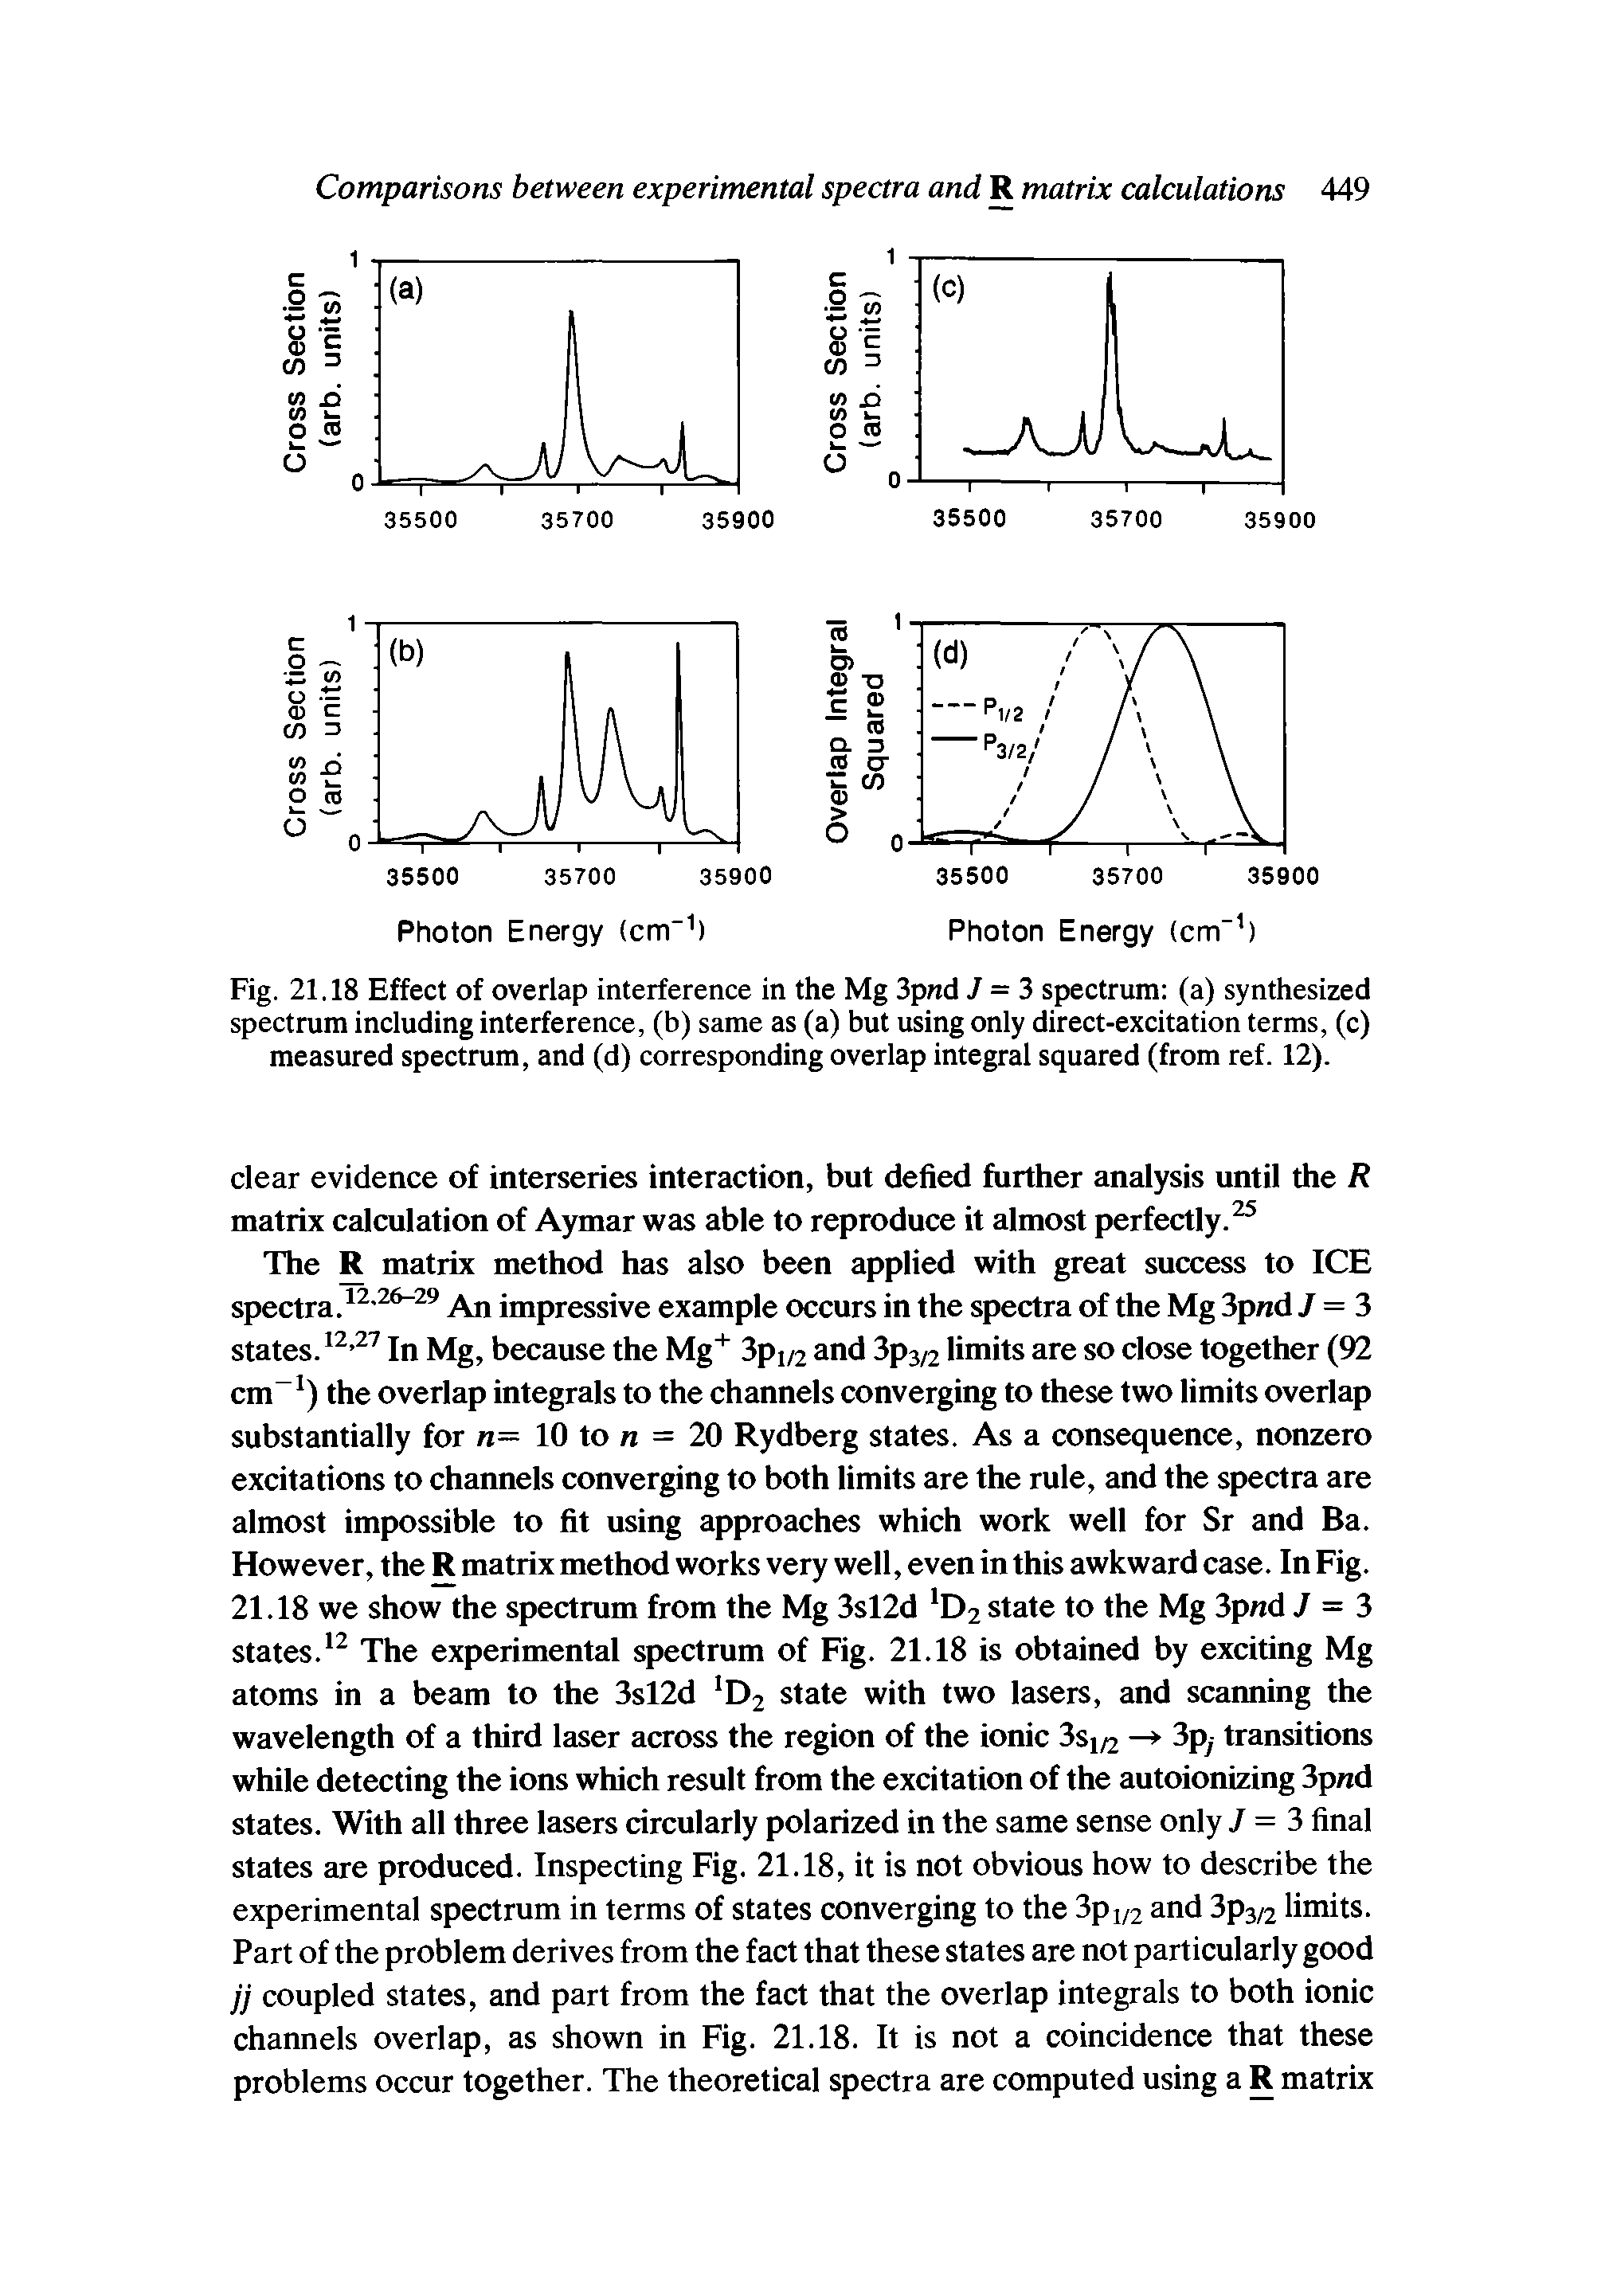 Fig. 21.18 Effect of overlap interference in the Mg 3pnd 7 = 3 spectrum (a) synthesized spectrum including interference, (b) same as (a) but using only direct-excitation terms, (c) measured spectrum, and (d) corresponding overlap integral squared (from ref. 12).